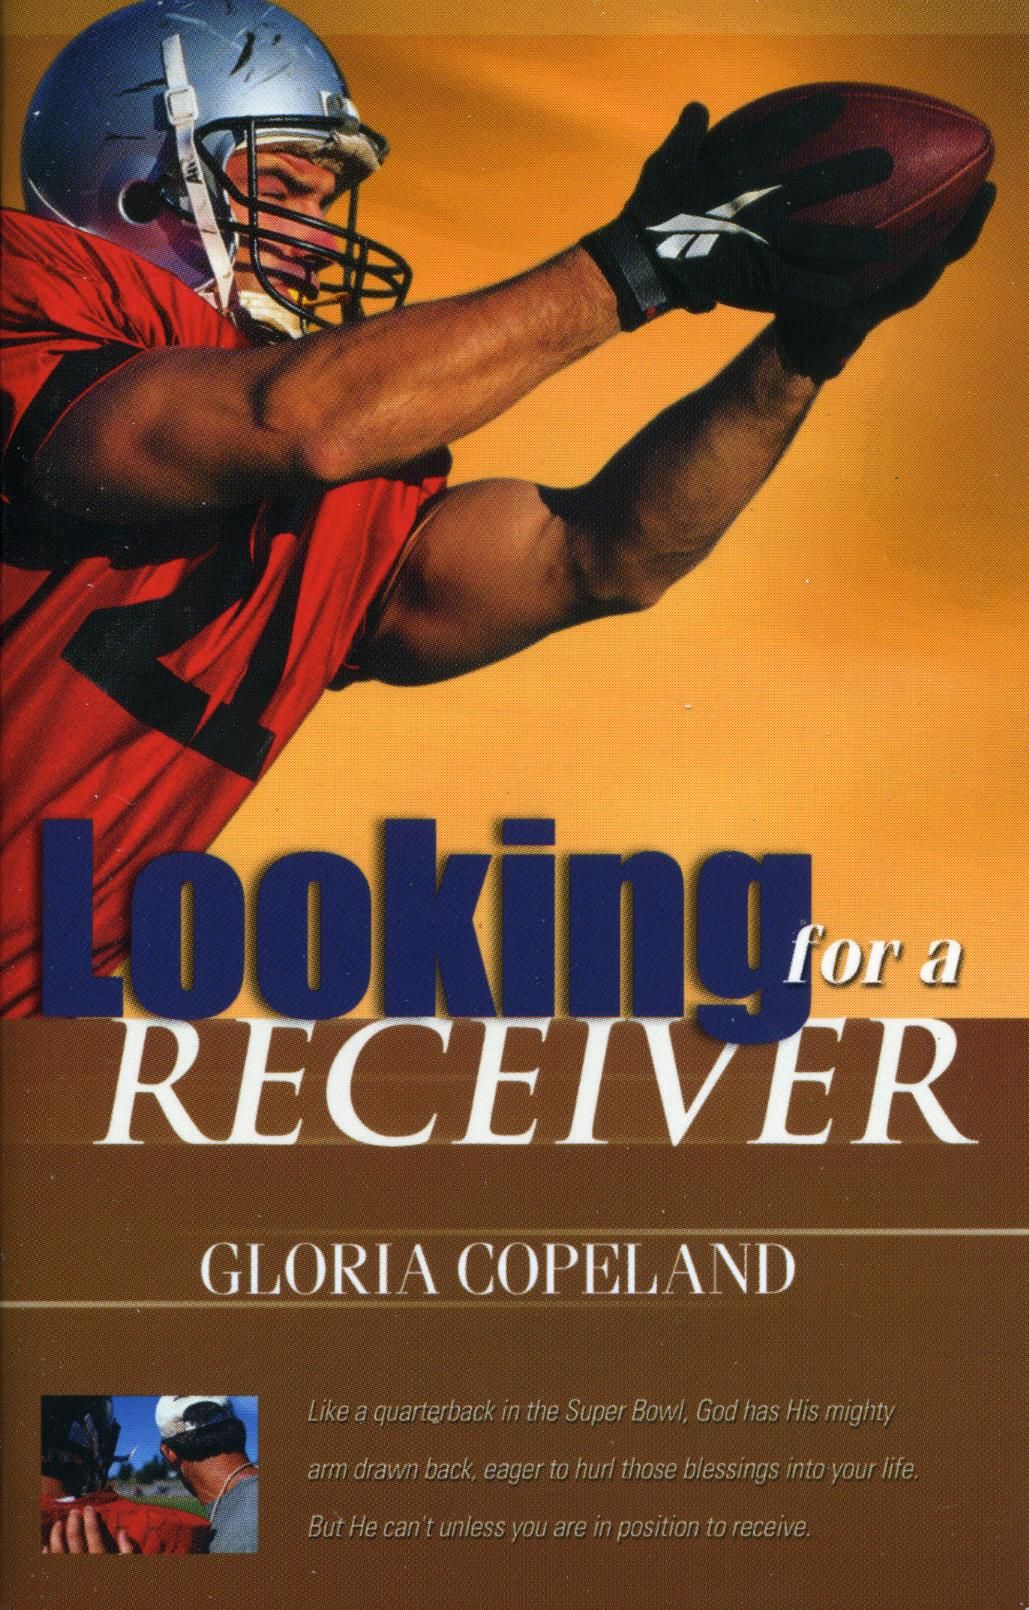 G. Copeland: Looking for a receiver